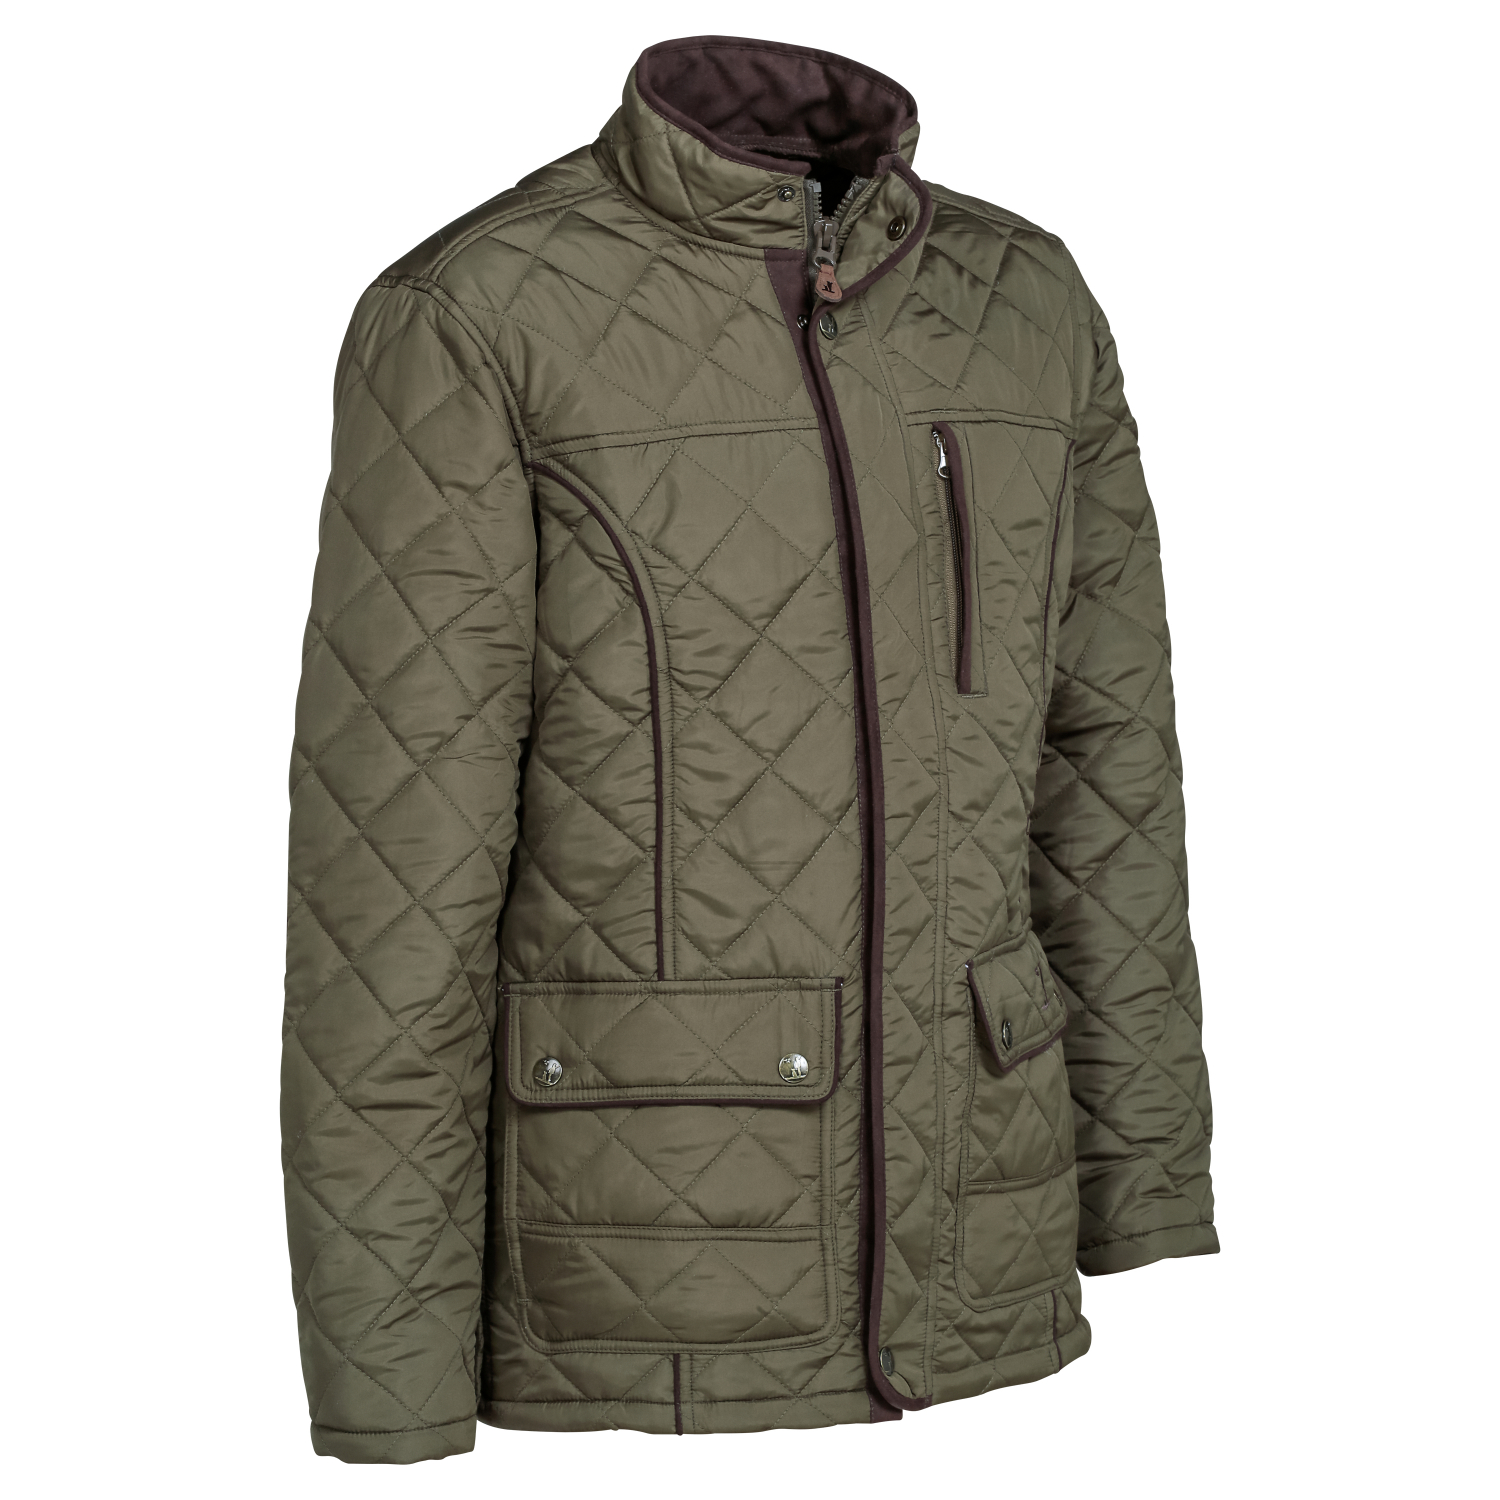 Men's Percussion Men's Quilted Jacket Stalion 